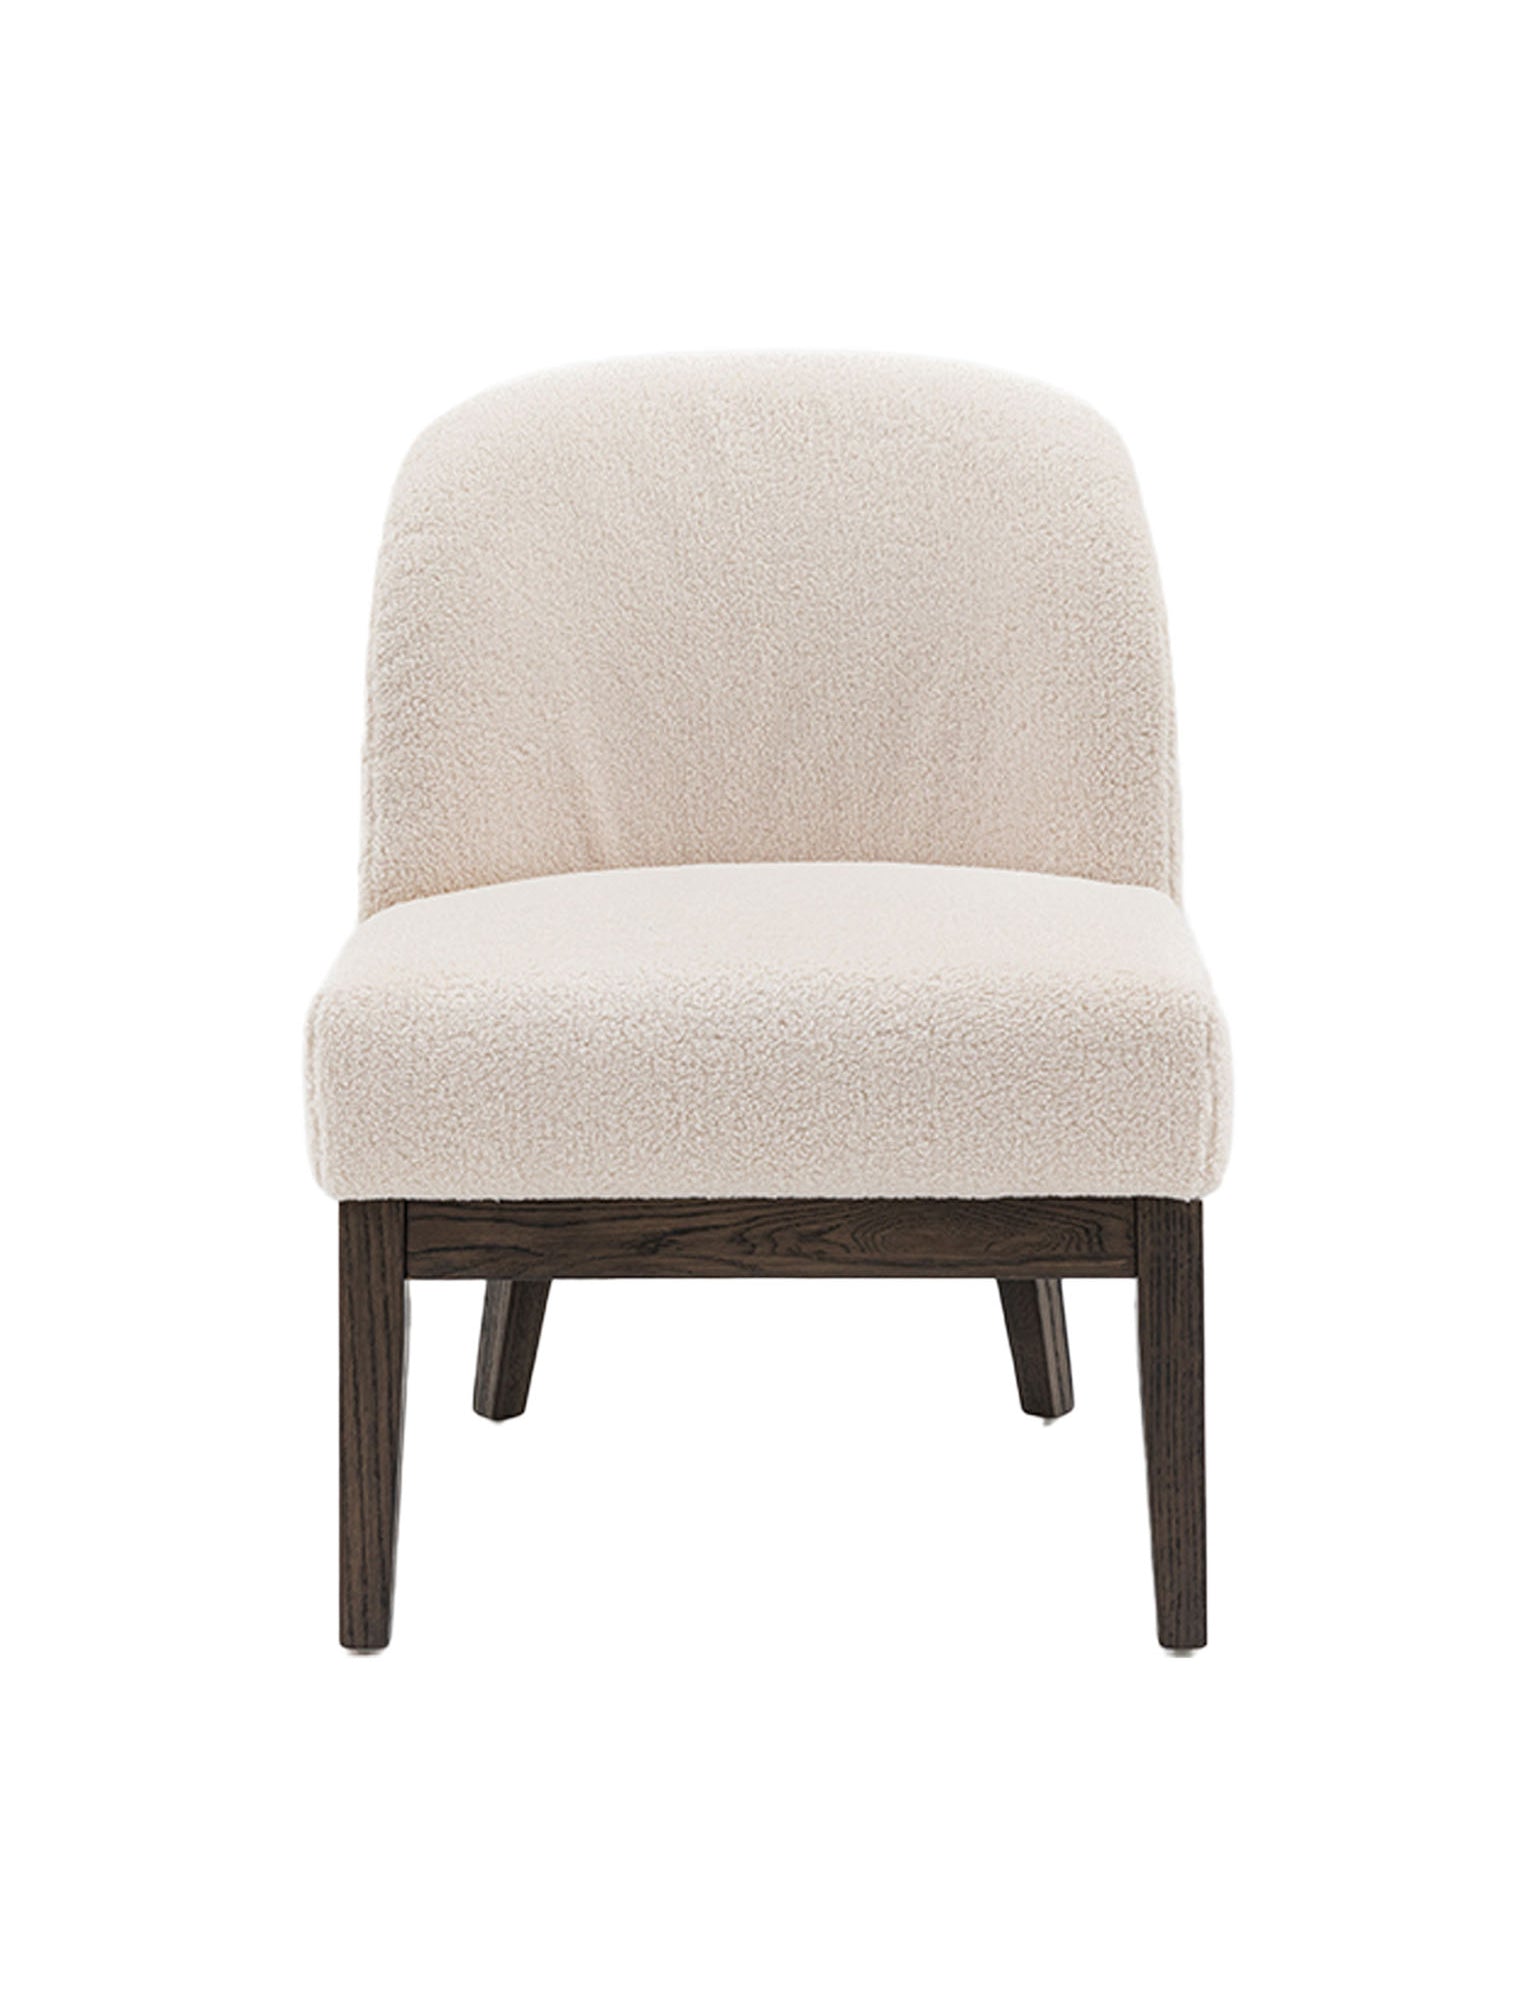 cream low chair